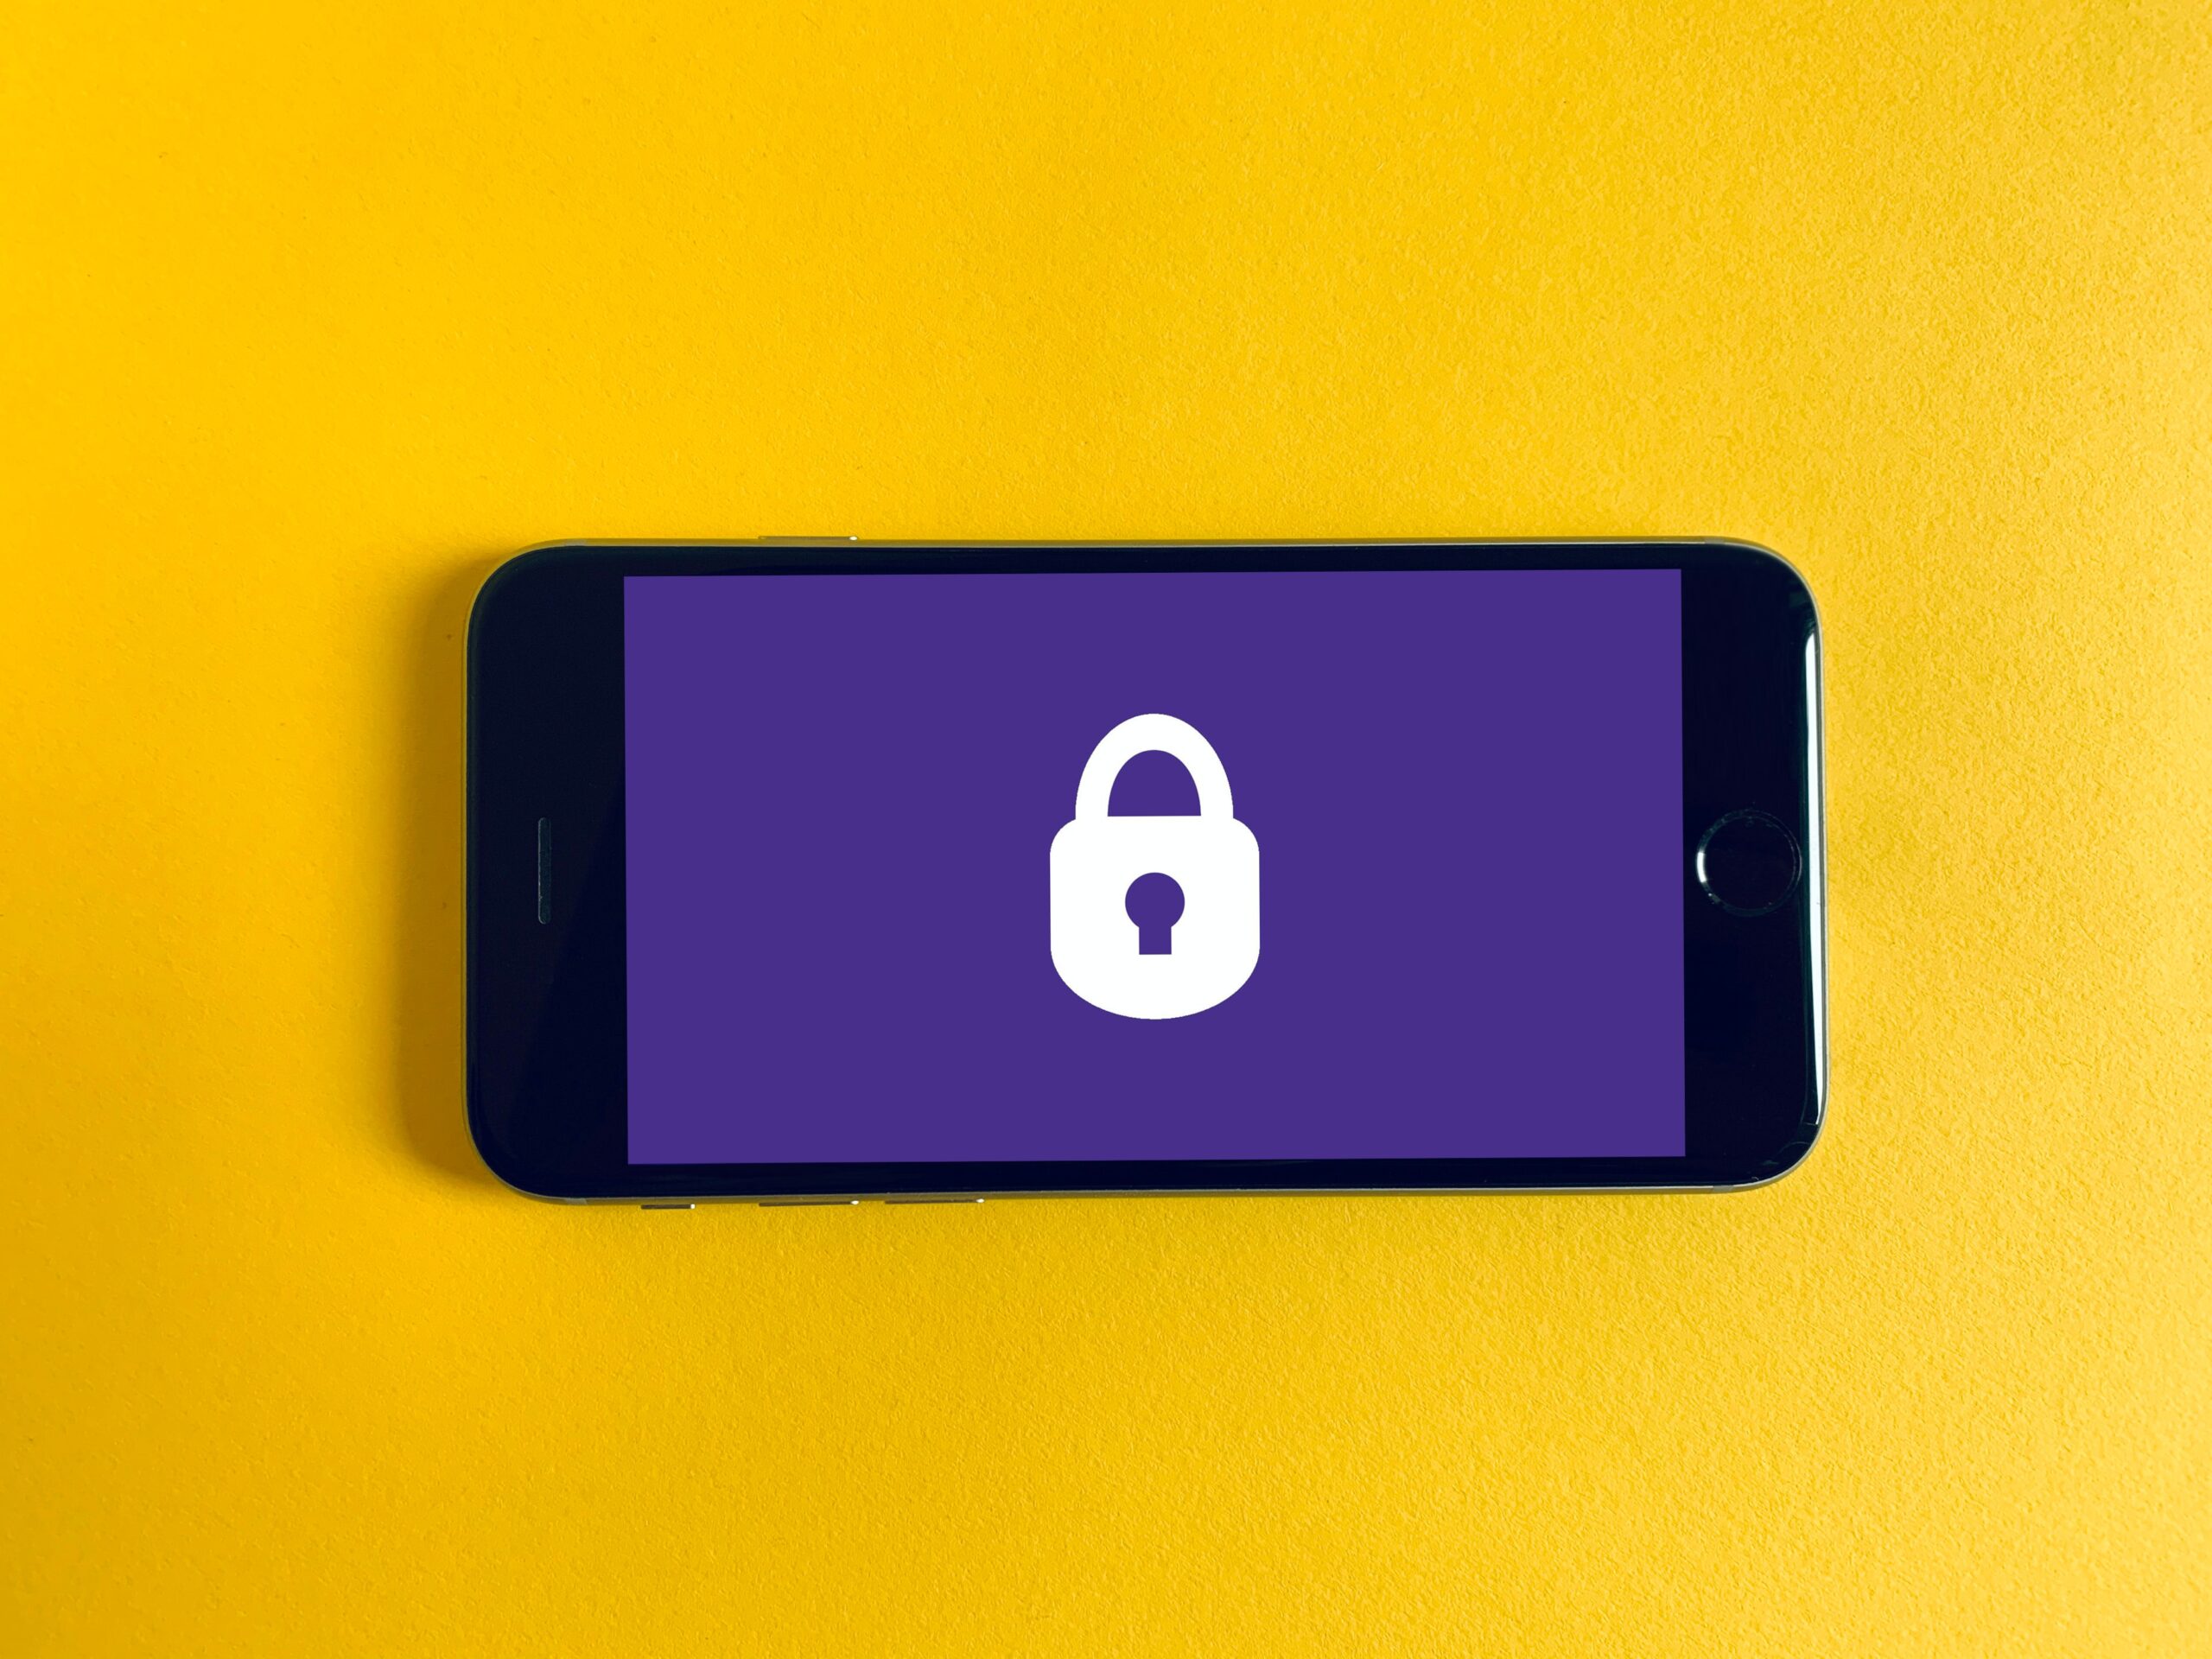 Survey anonymity is represented by a phone displaying a white padlock layered on a purple background. The phone is resting on a bright yellow surface. Image by franckinjapan.